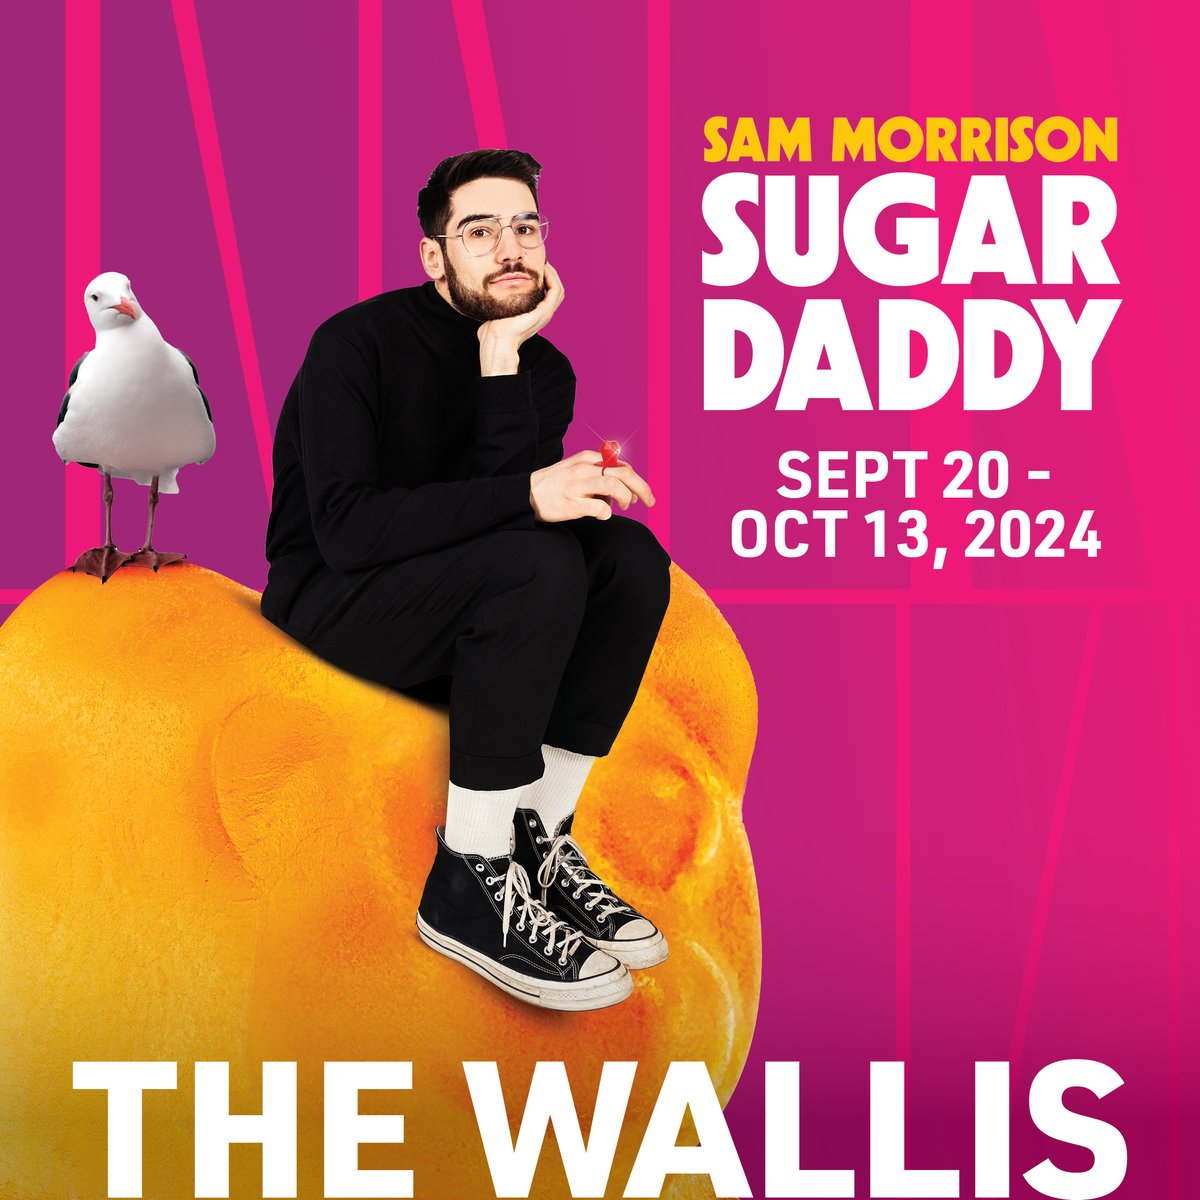 Got a sweet tooth? 👀 Hot off acclaimed runs in Edinburgh, London, New York, and across North America, comedian Sam Morrison brings his no-holds-barred sass to the The Wallis this Fall. Experience the remarkable true story he never wanted to happen.